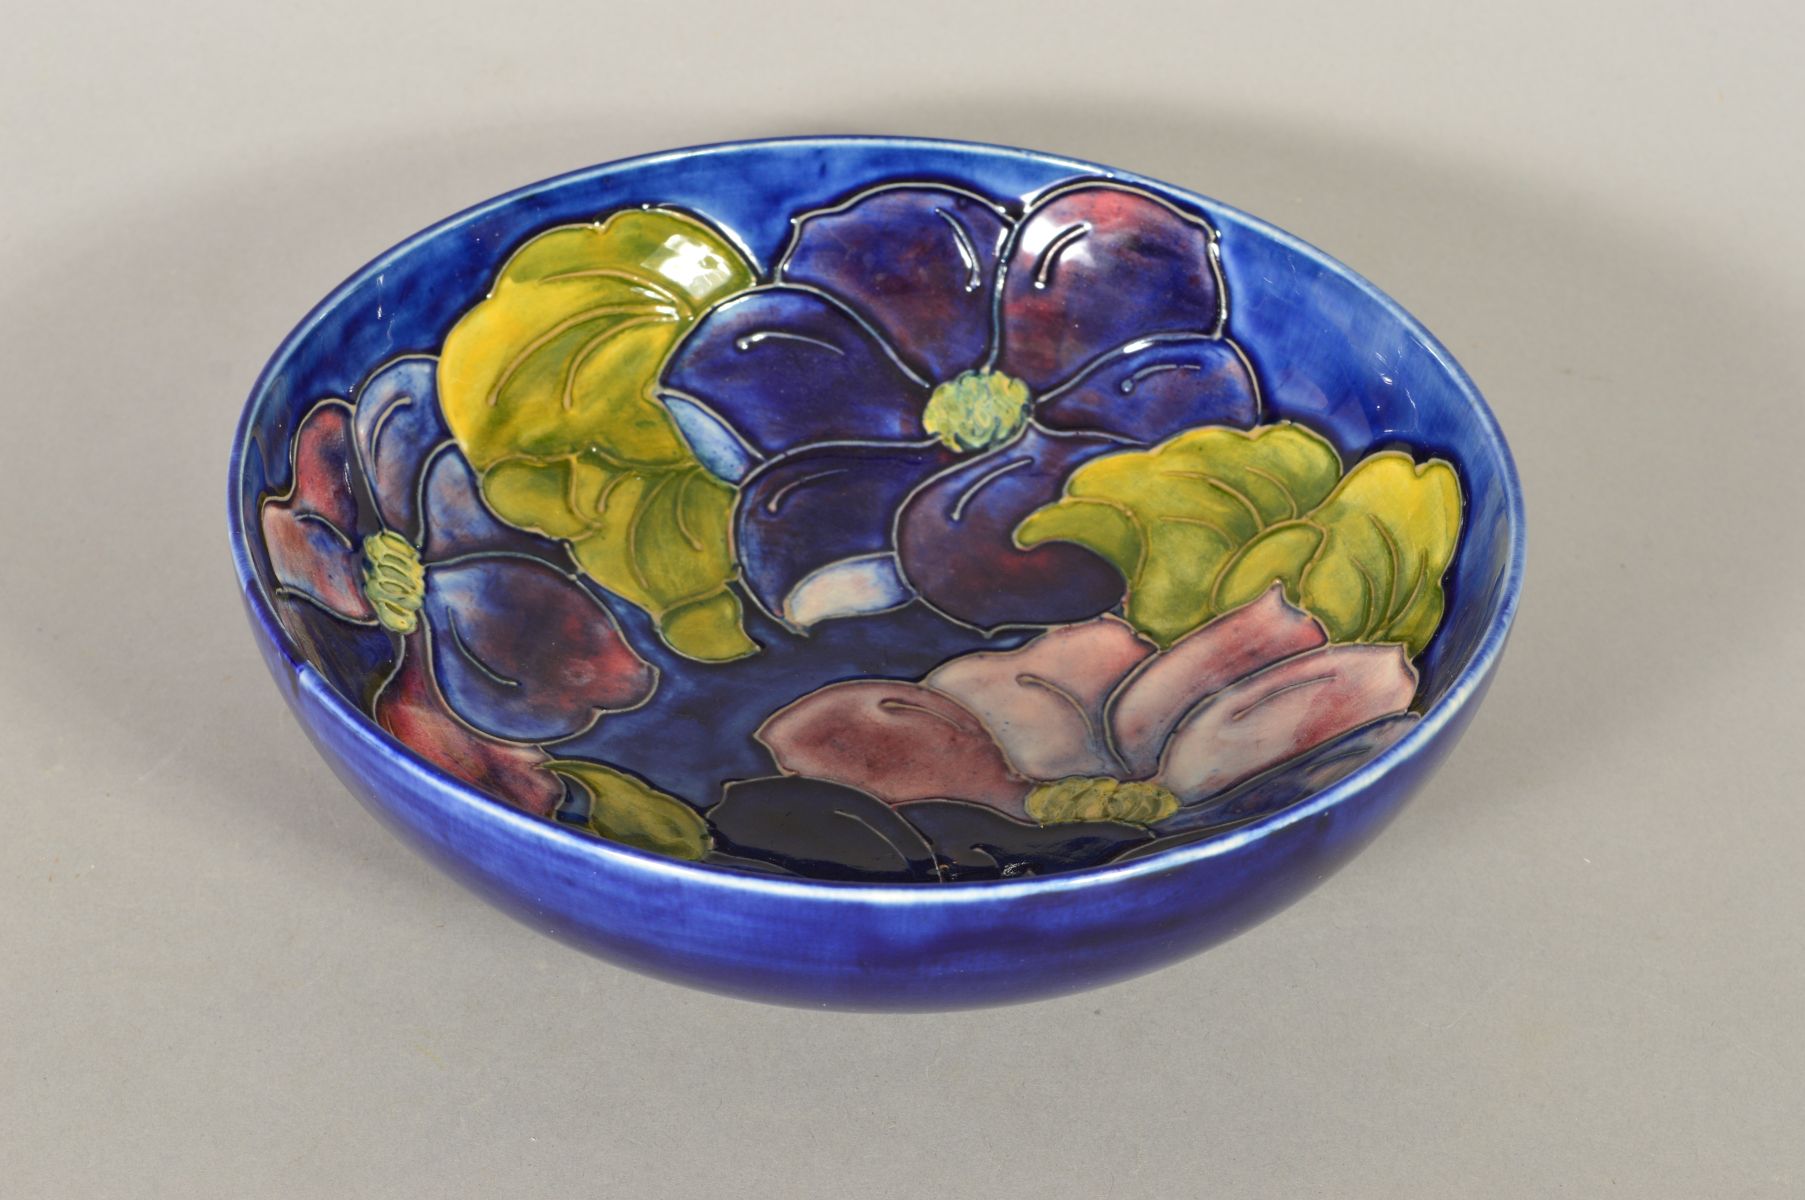 A MOORCROFT POTTERY FOOTED BOWL, 'Clematis' pattern on blue ground, impressed marks, Queen Mary